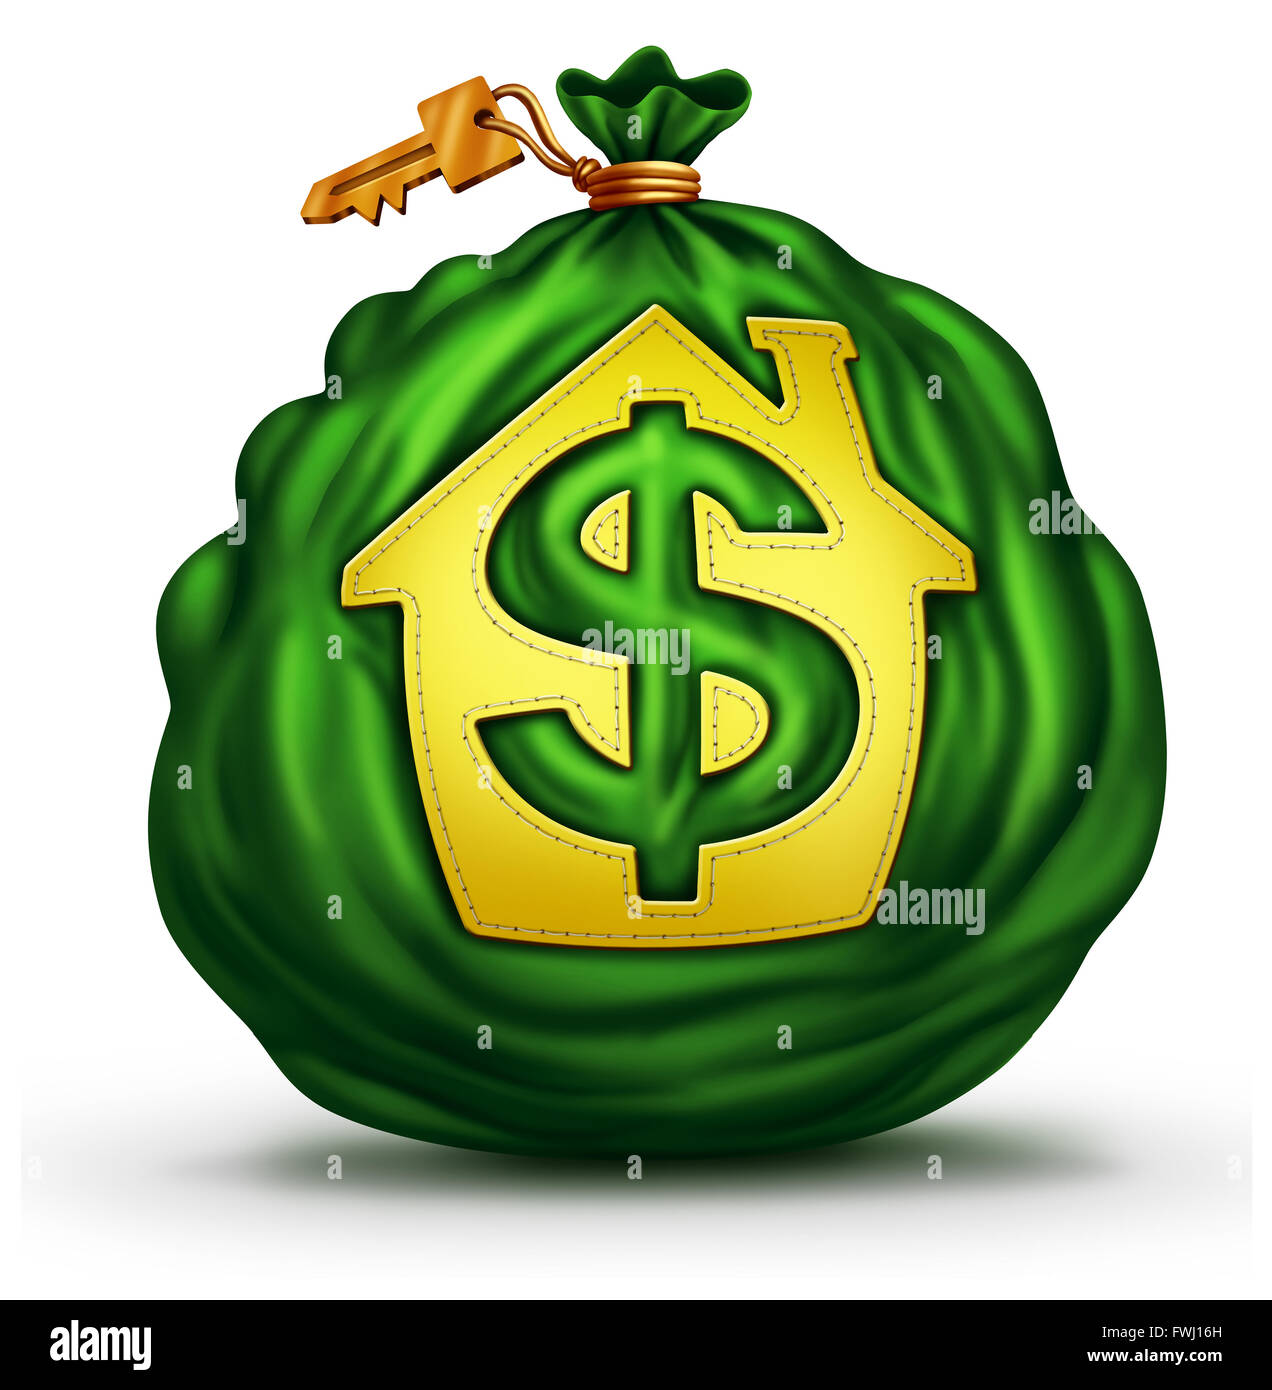 Bank Mortgage symbol as a green money bag with a house or home icon with a dollar signas a financial and economic metaphor for residential credit and real estate business. Stock Photo